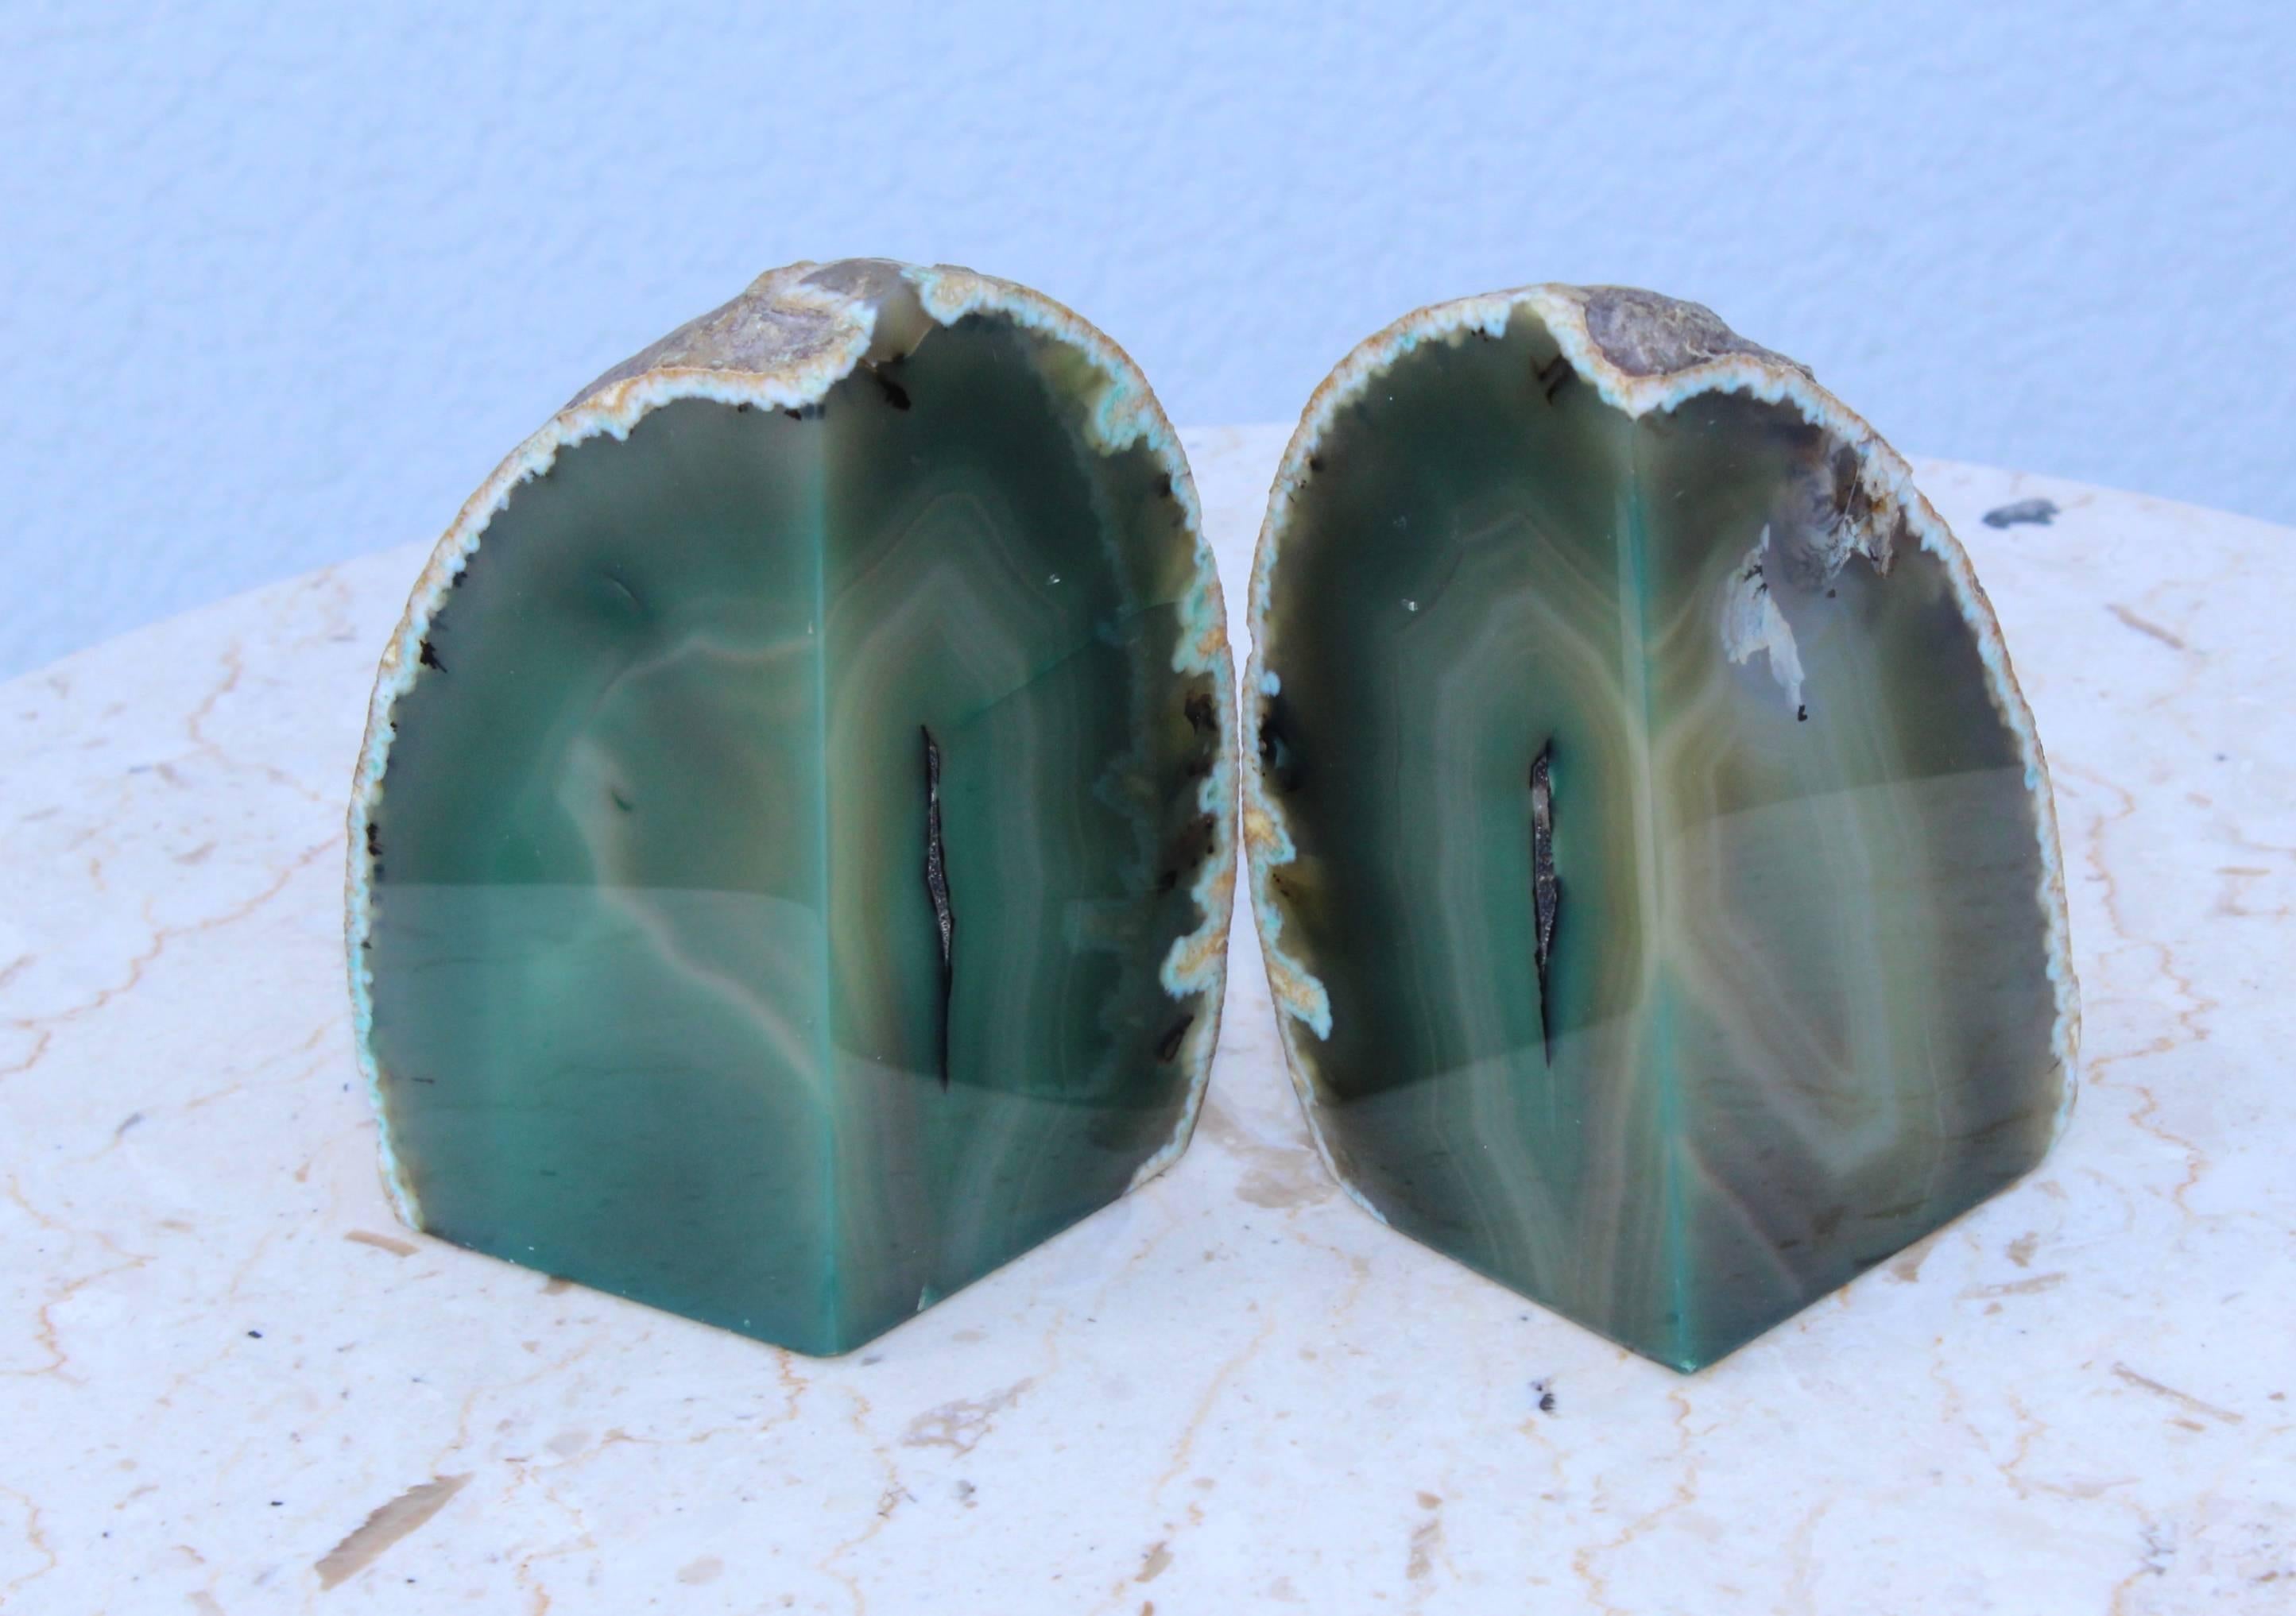 1980s modern agate bookends.